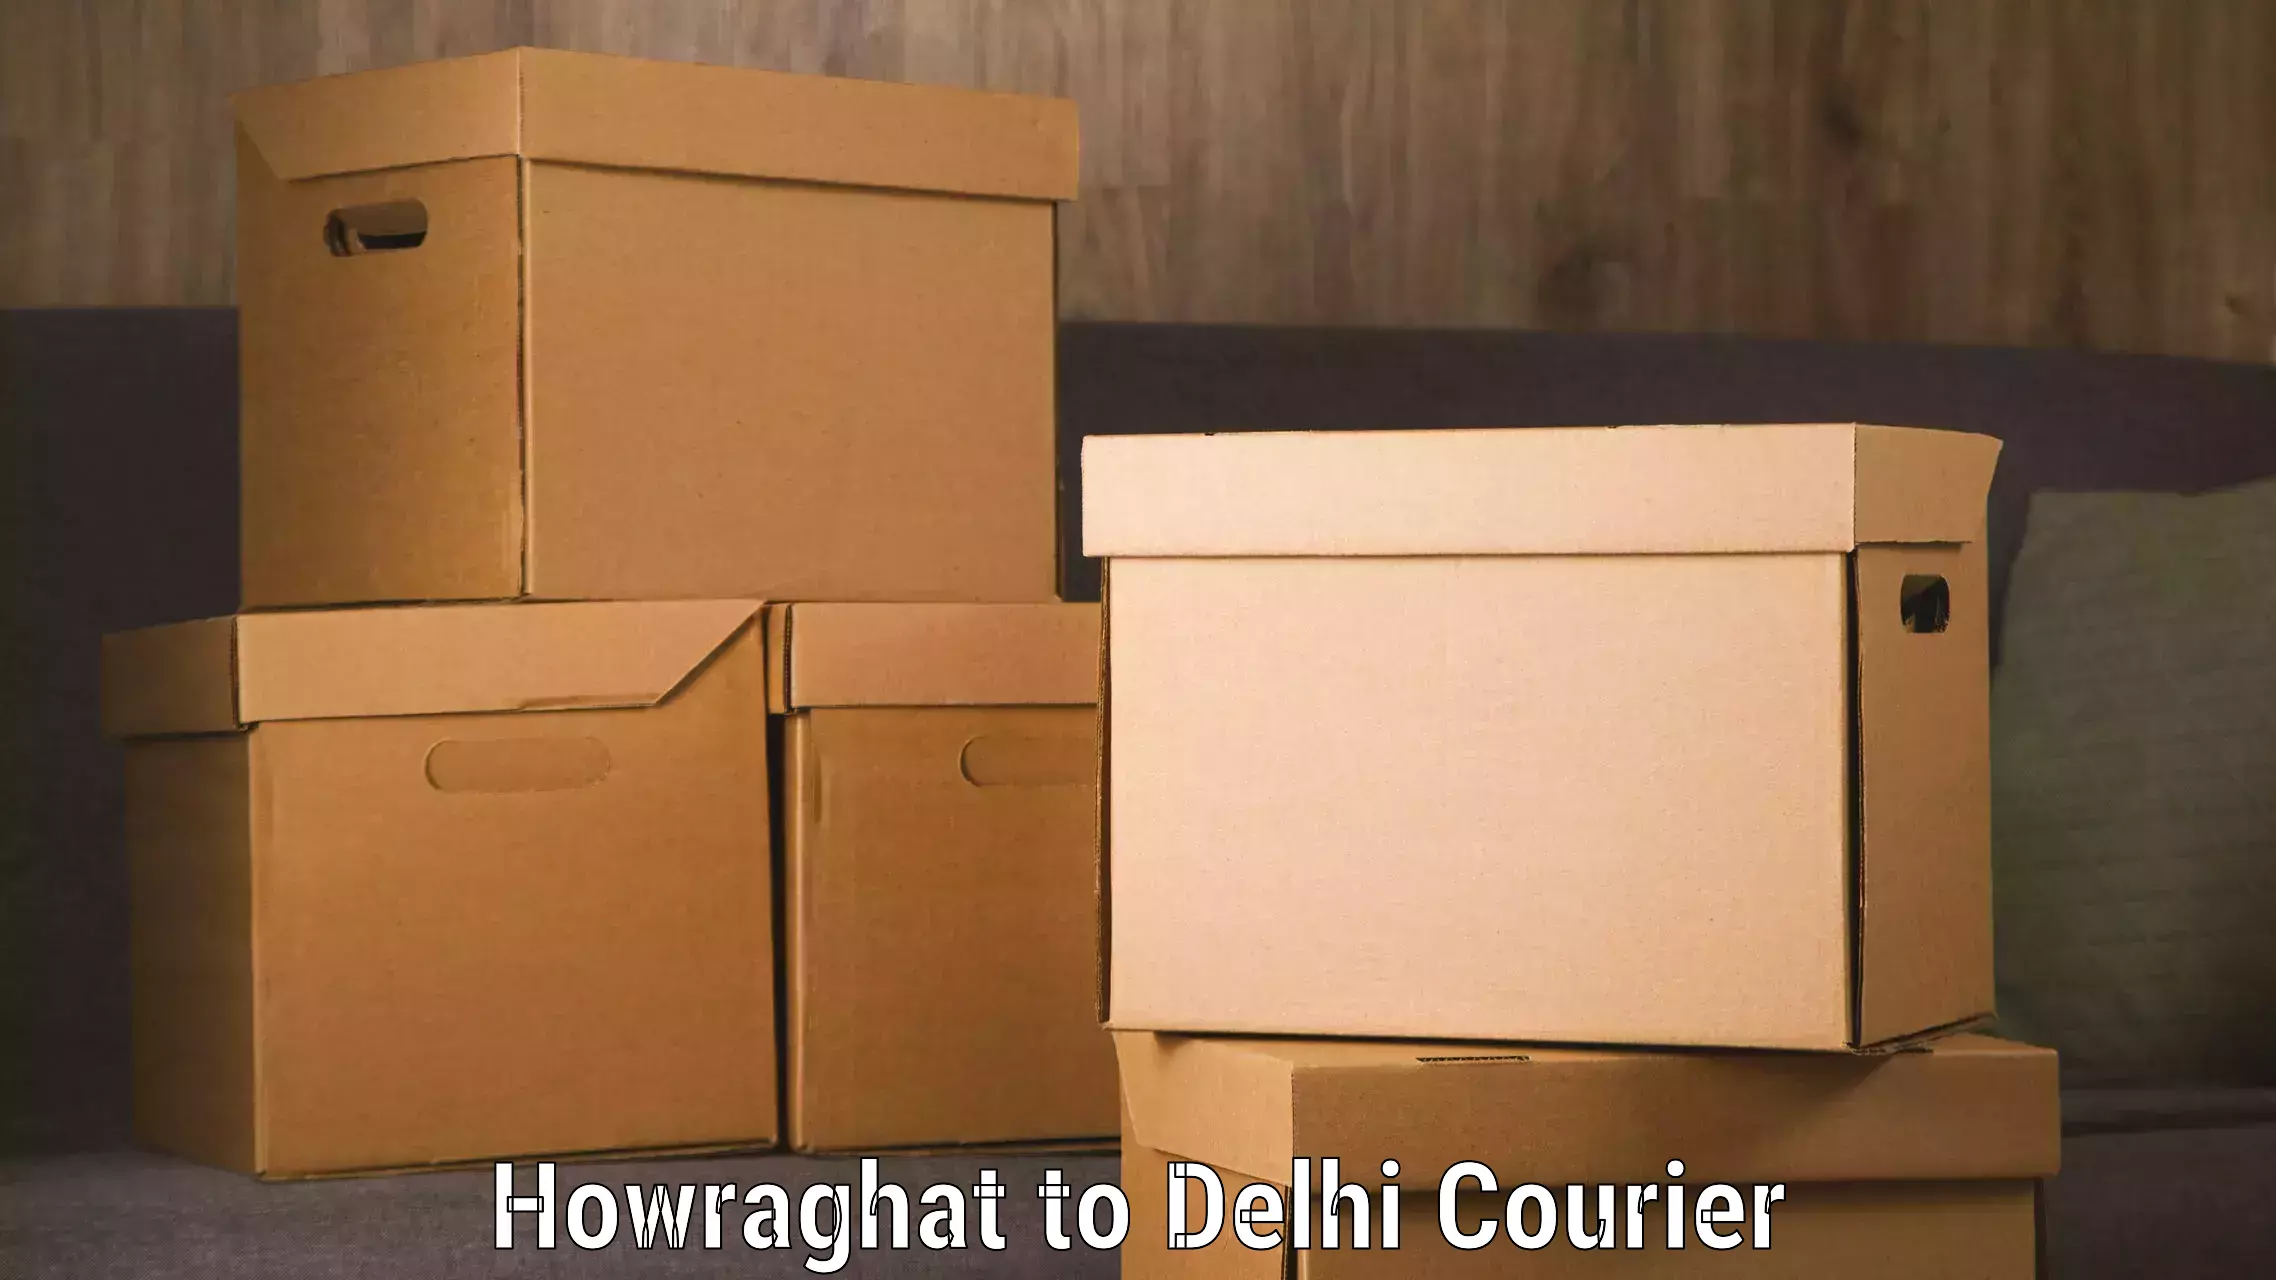 Airport luggage delivery Howraghat to NCR